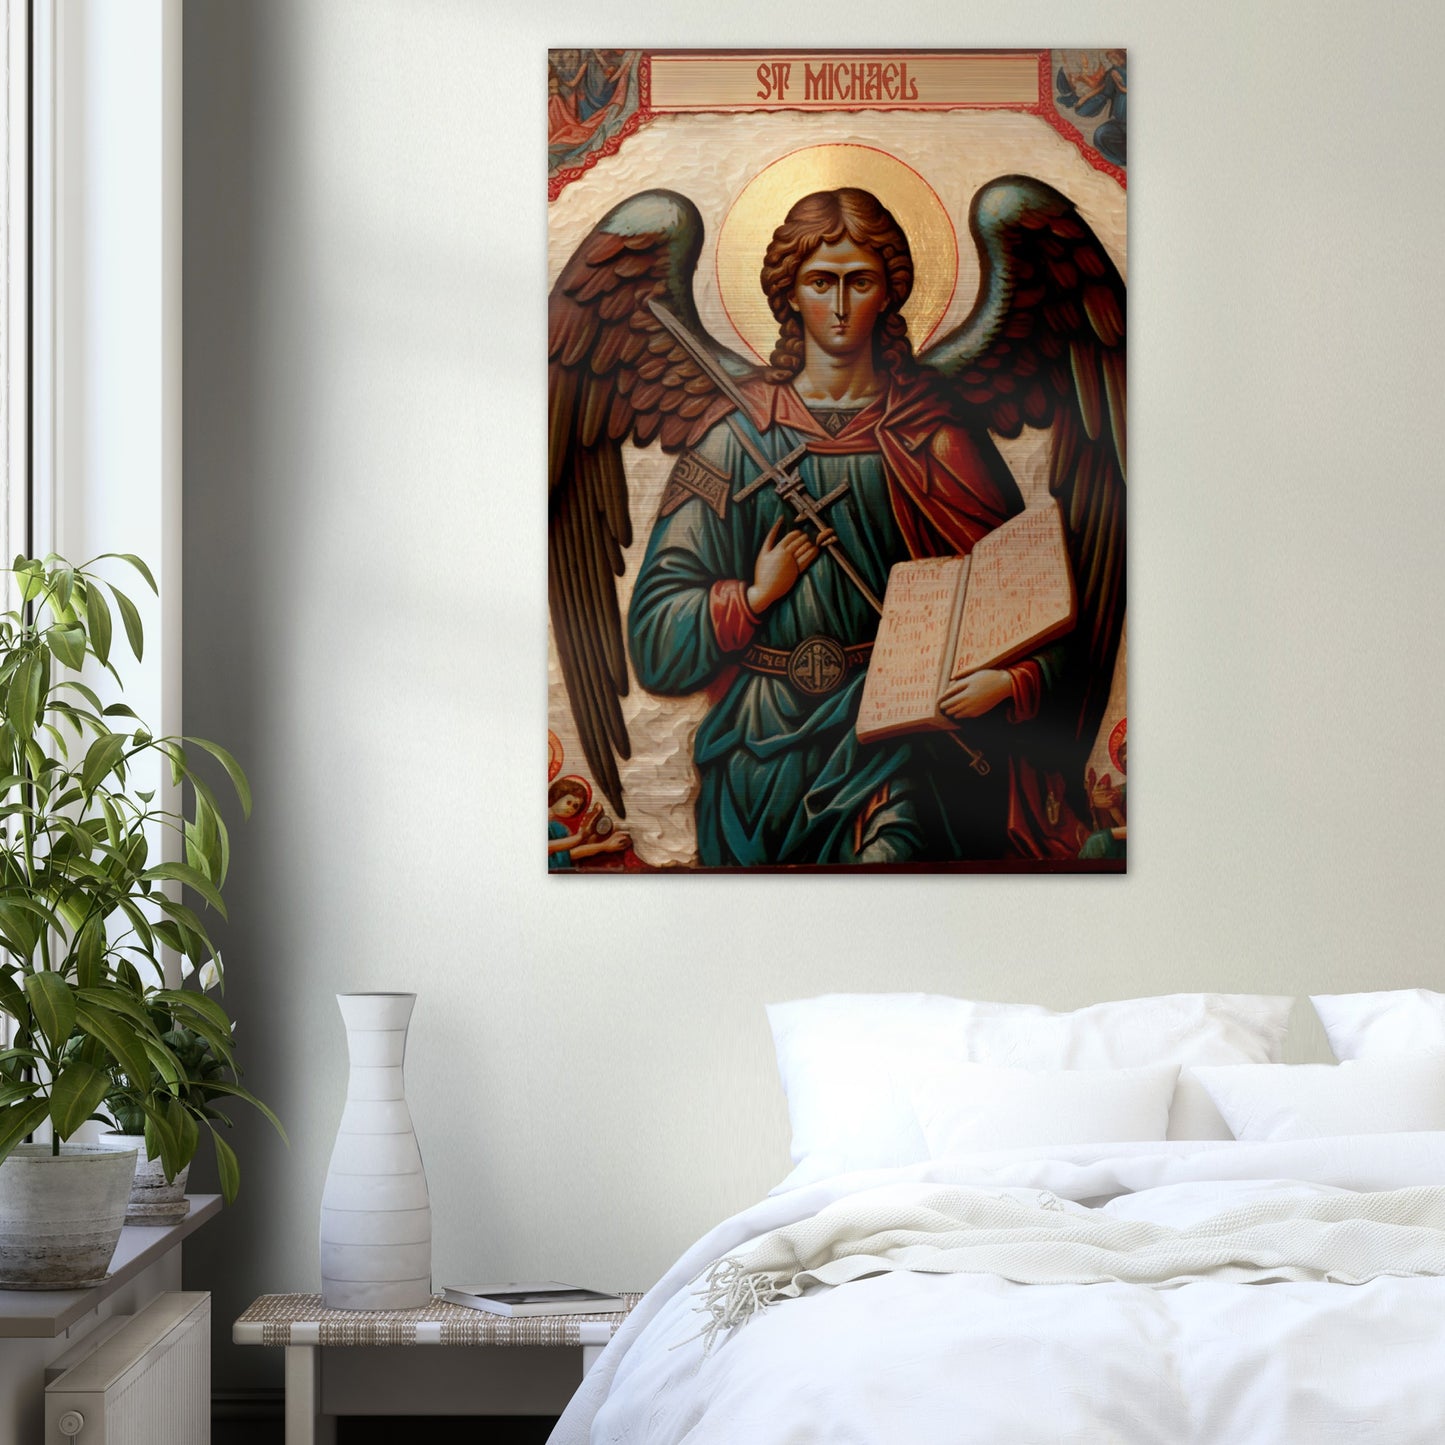 St. Michael the Archangel ✠ Brushed Aluminum Icon